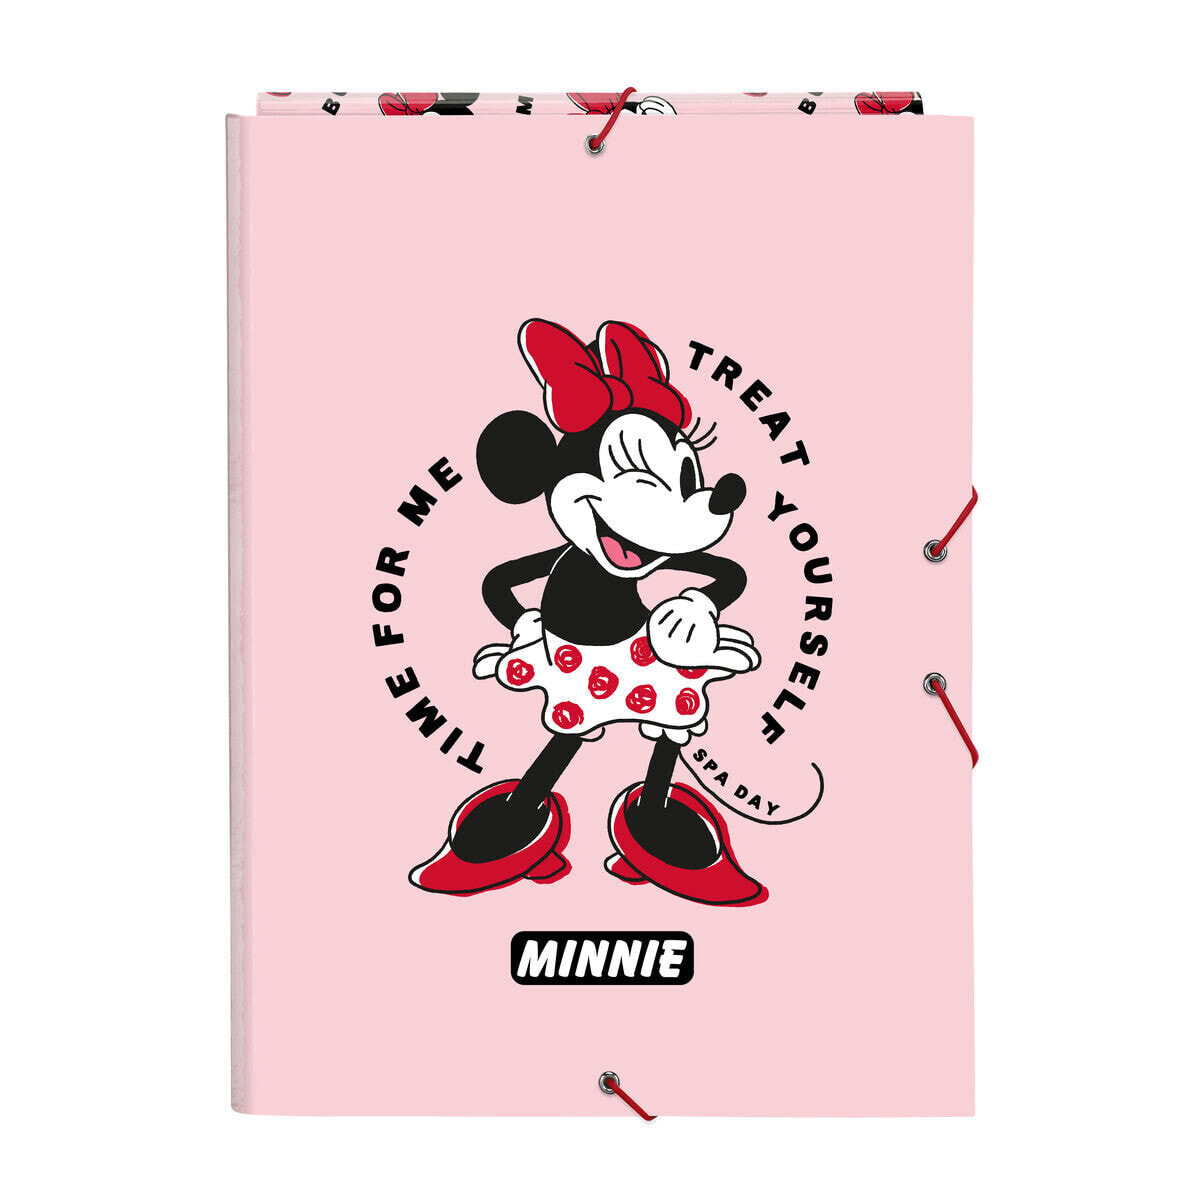 Organiser Folder Minnie Mouse Me time Pink A4